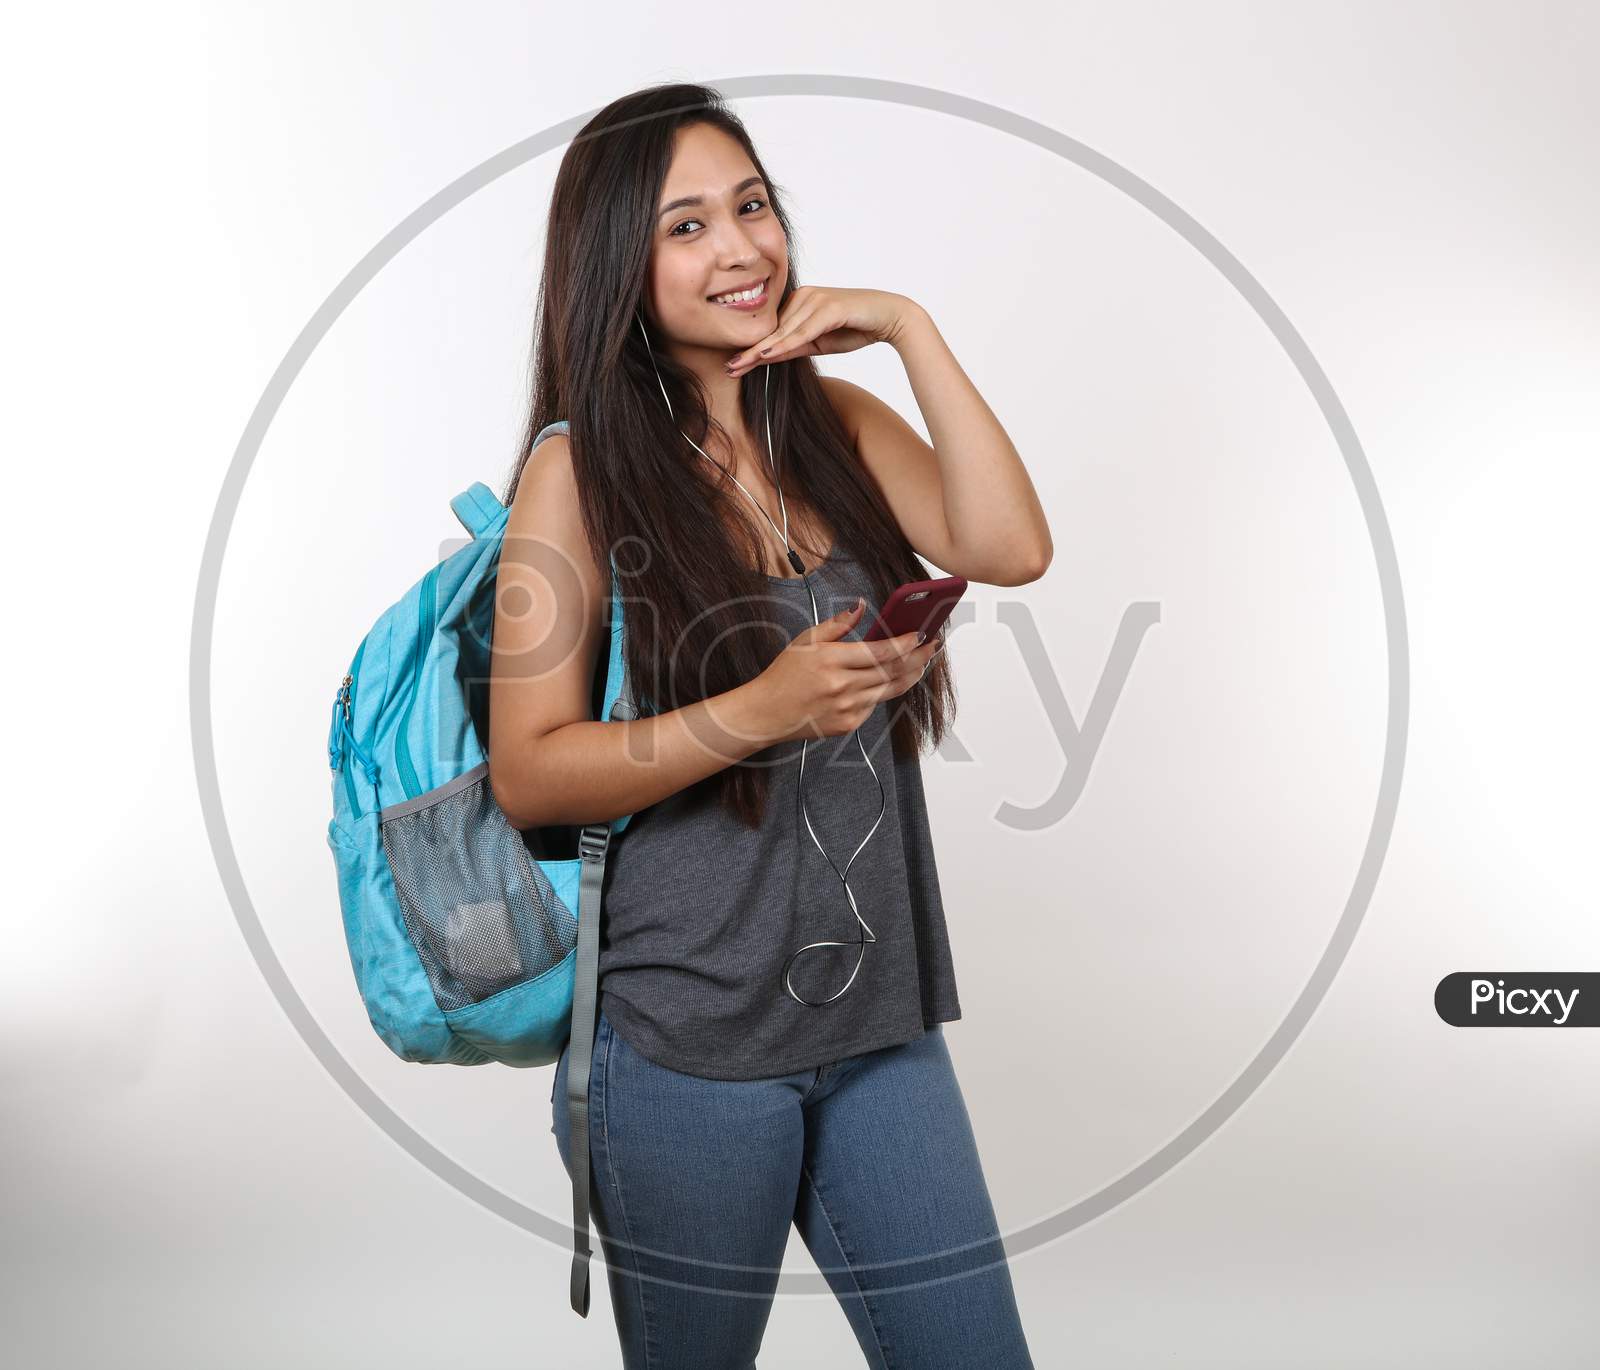 An Attractive Hispanic Student Wearing A Blue Backpack And Earphones Smiles As She Strikes A Pose.